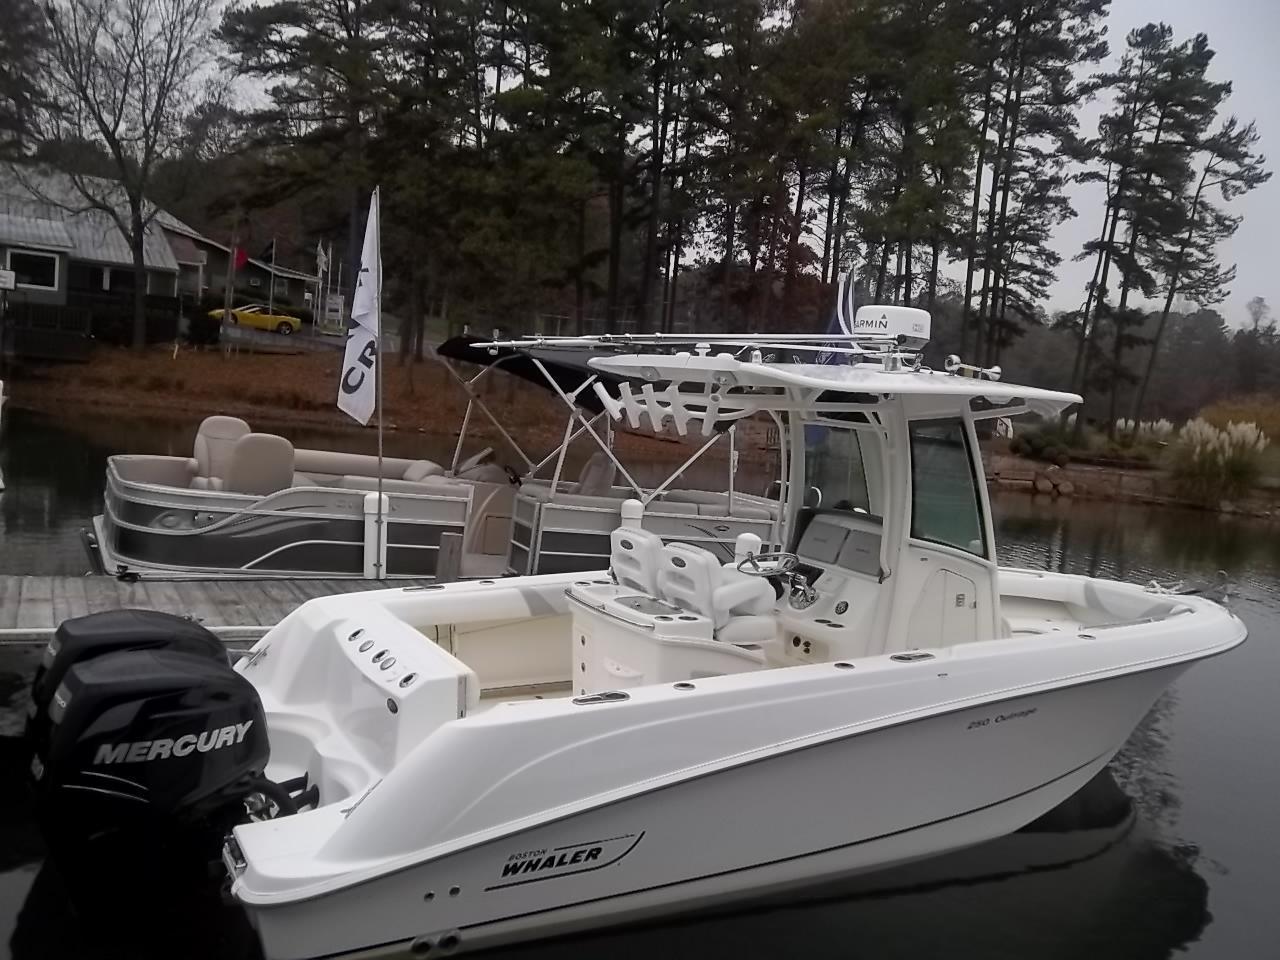 Boston Whaler 25 Outrage, Buford